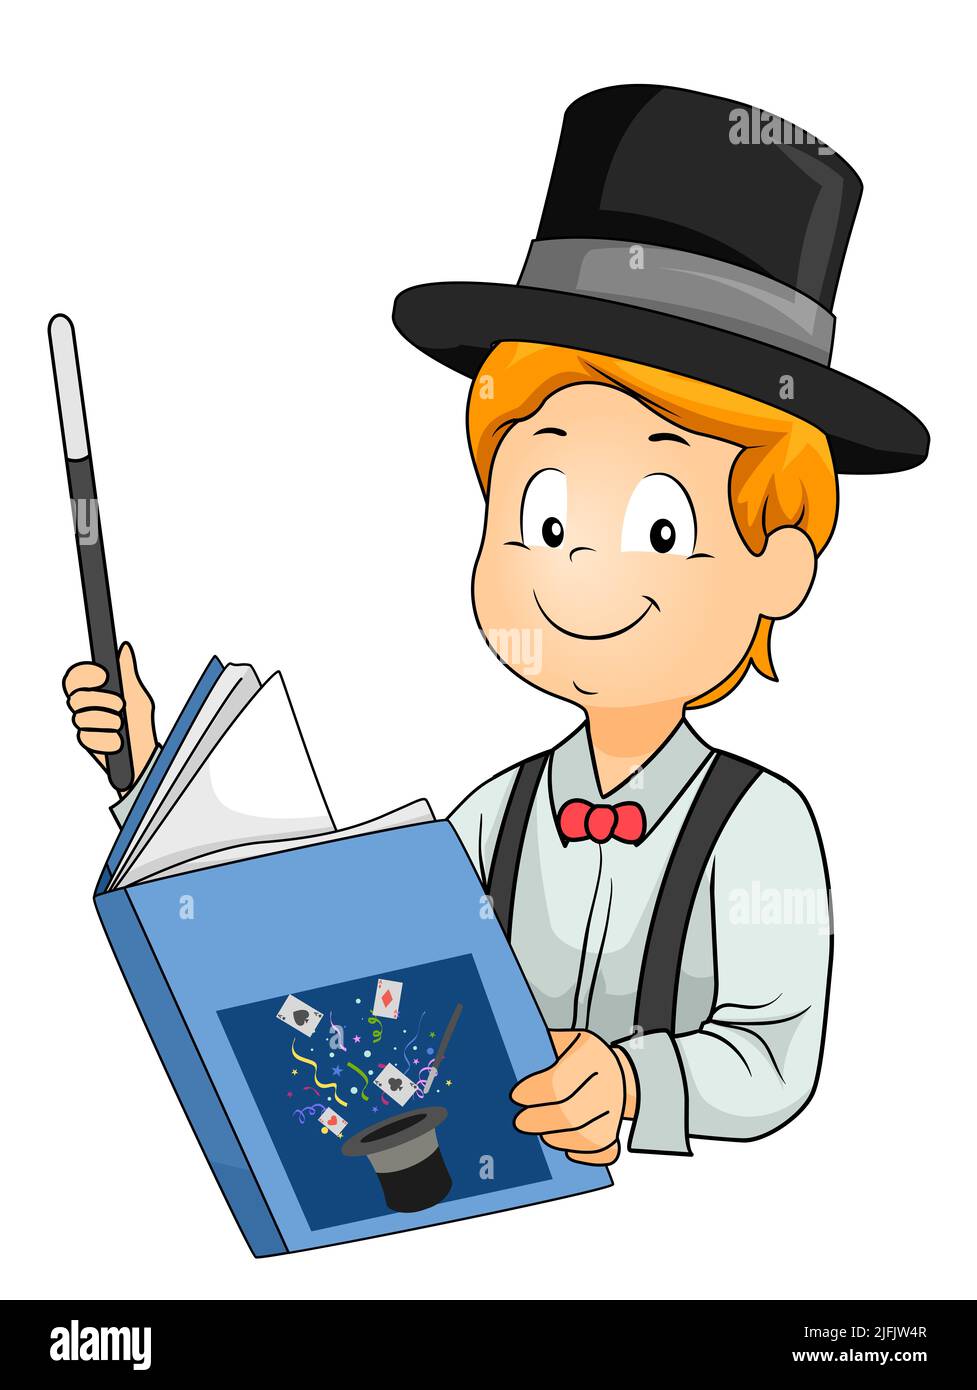 Illustration of Kid Boy Magician Wearing Top Hat, Holding Magic Wand and Reading Magic Book Stock Photo